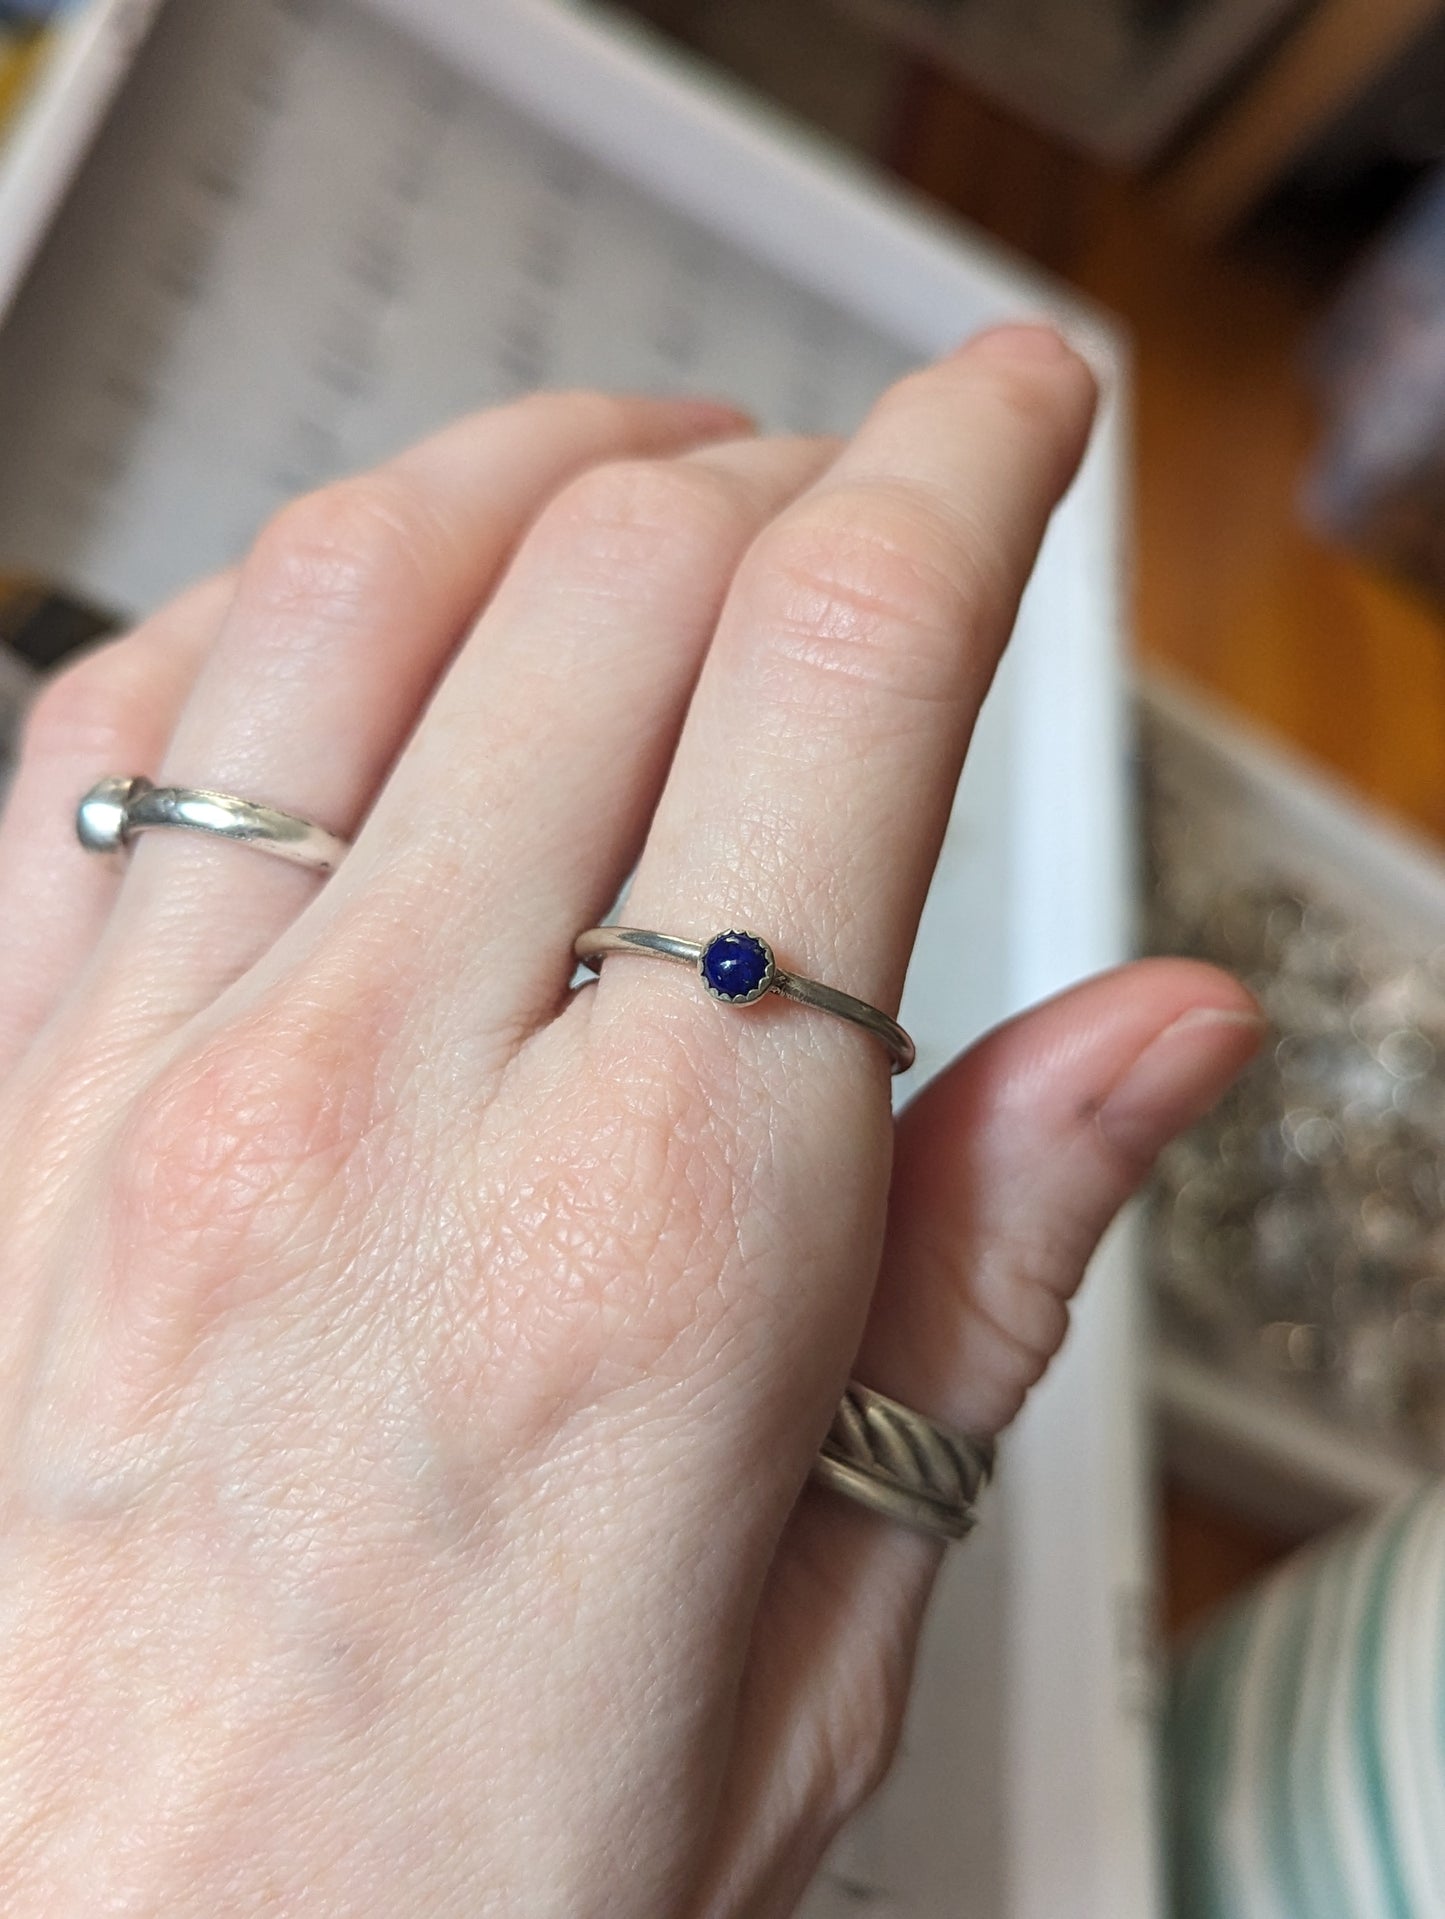 4mm Lapis Lazuli Sterling Silver Stacker Ring - Size 10